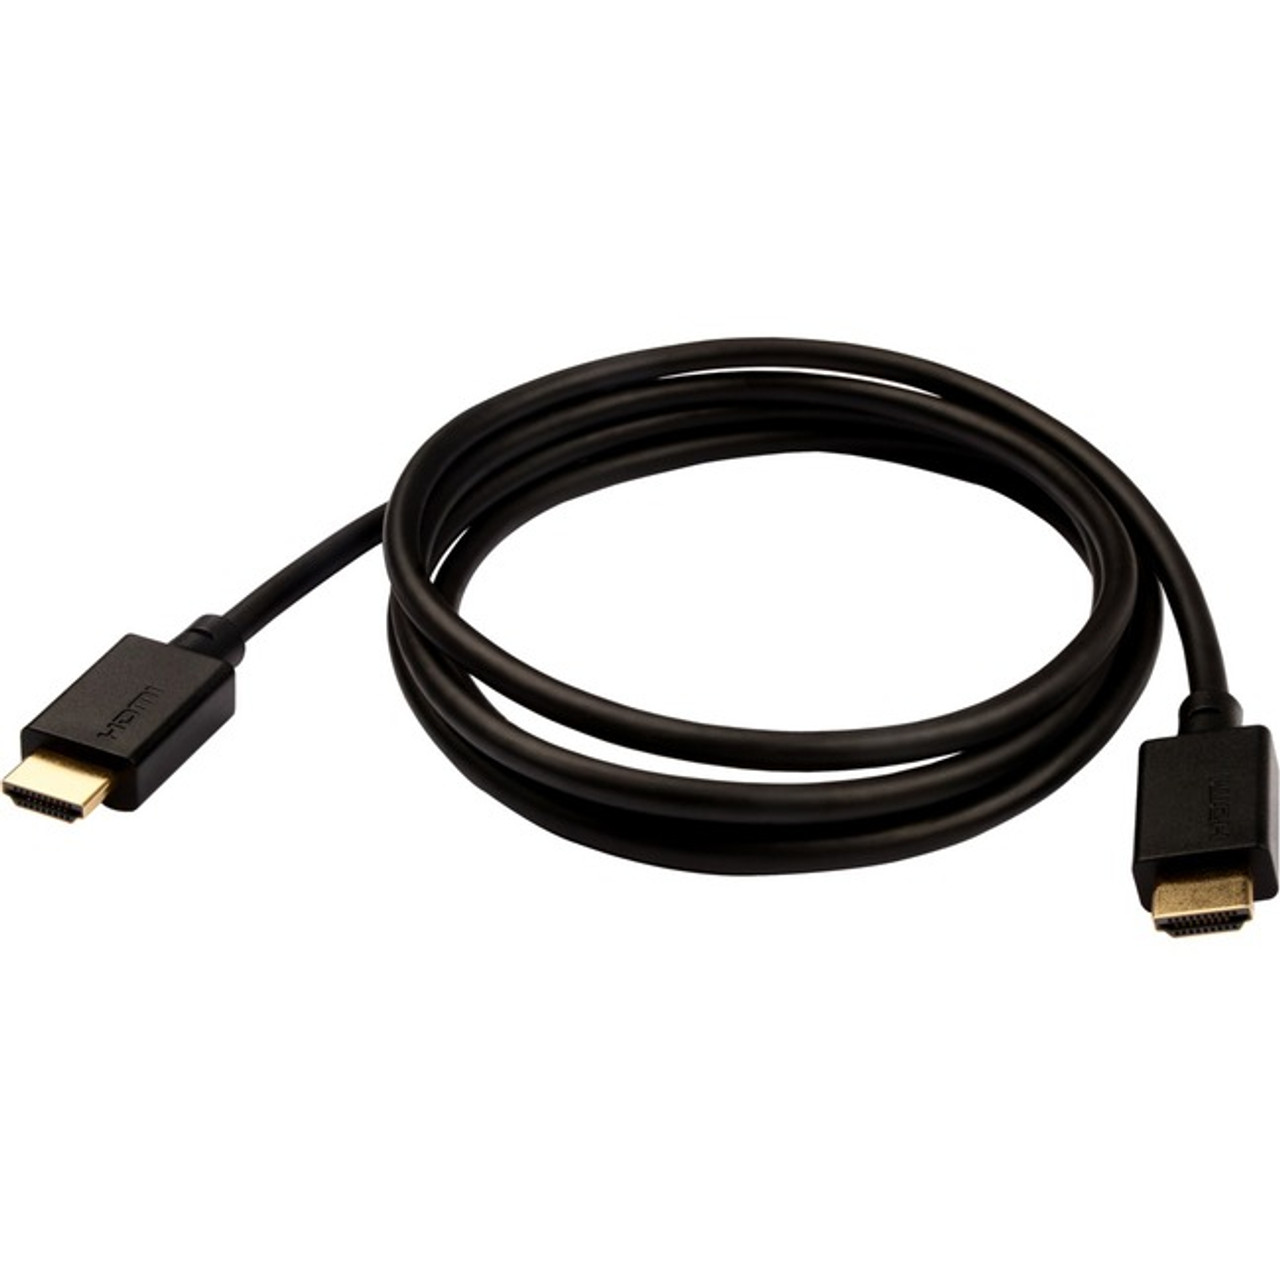 CABLE TIPO C A HDMI 2M